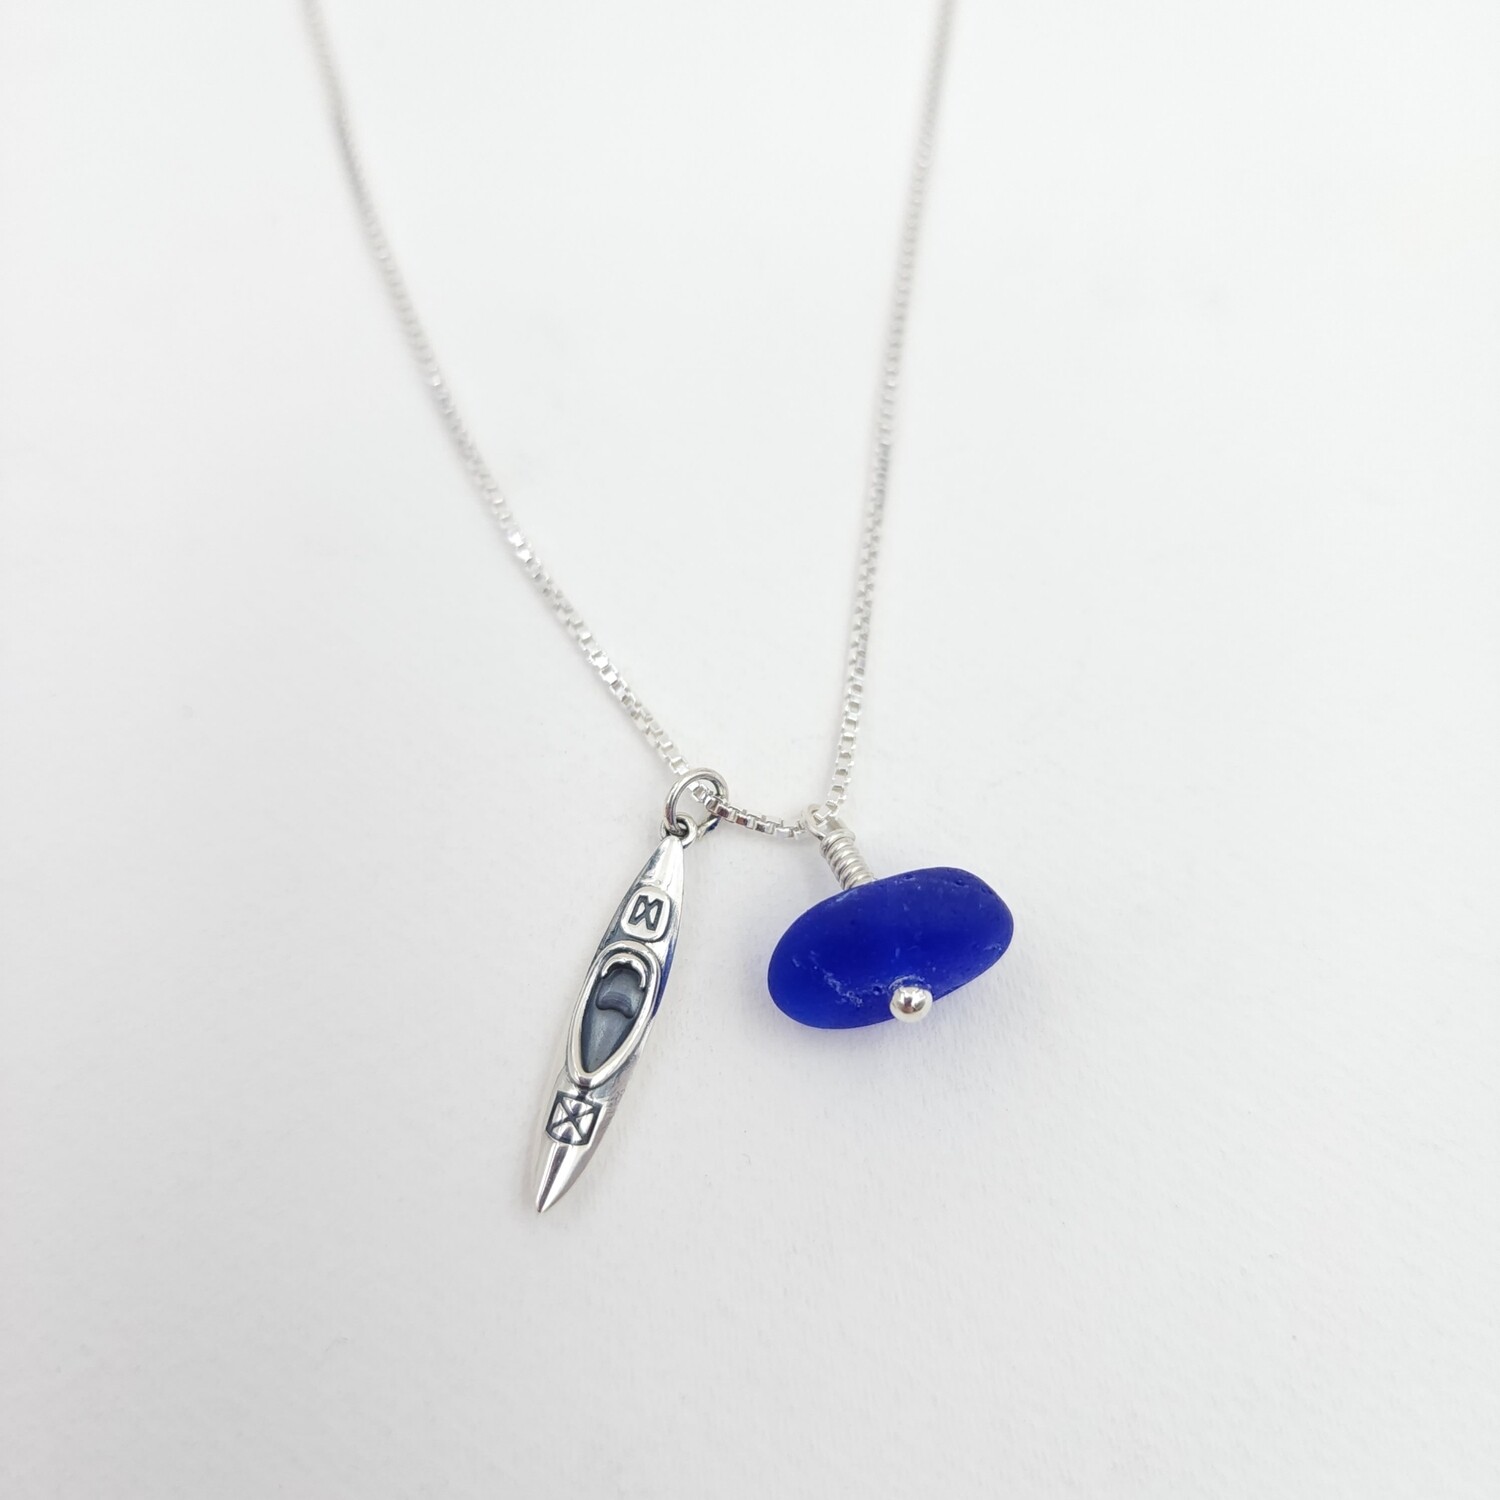 Lake Erie Beach Glass and Kayak Charm Necklace